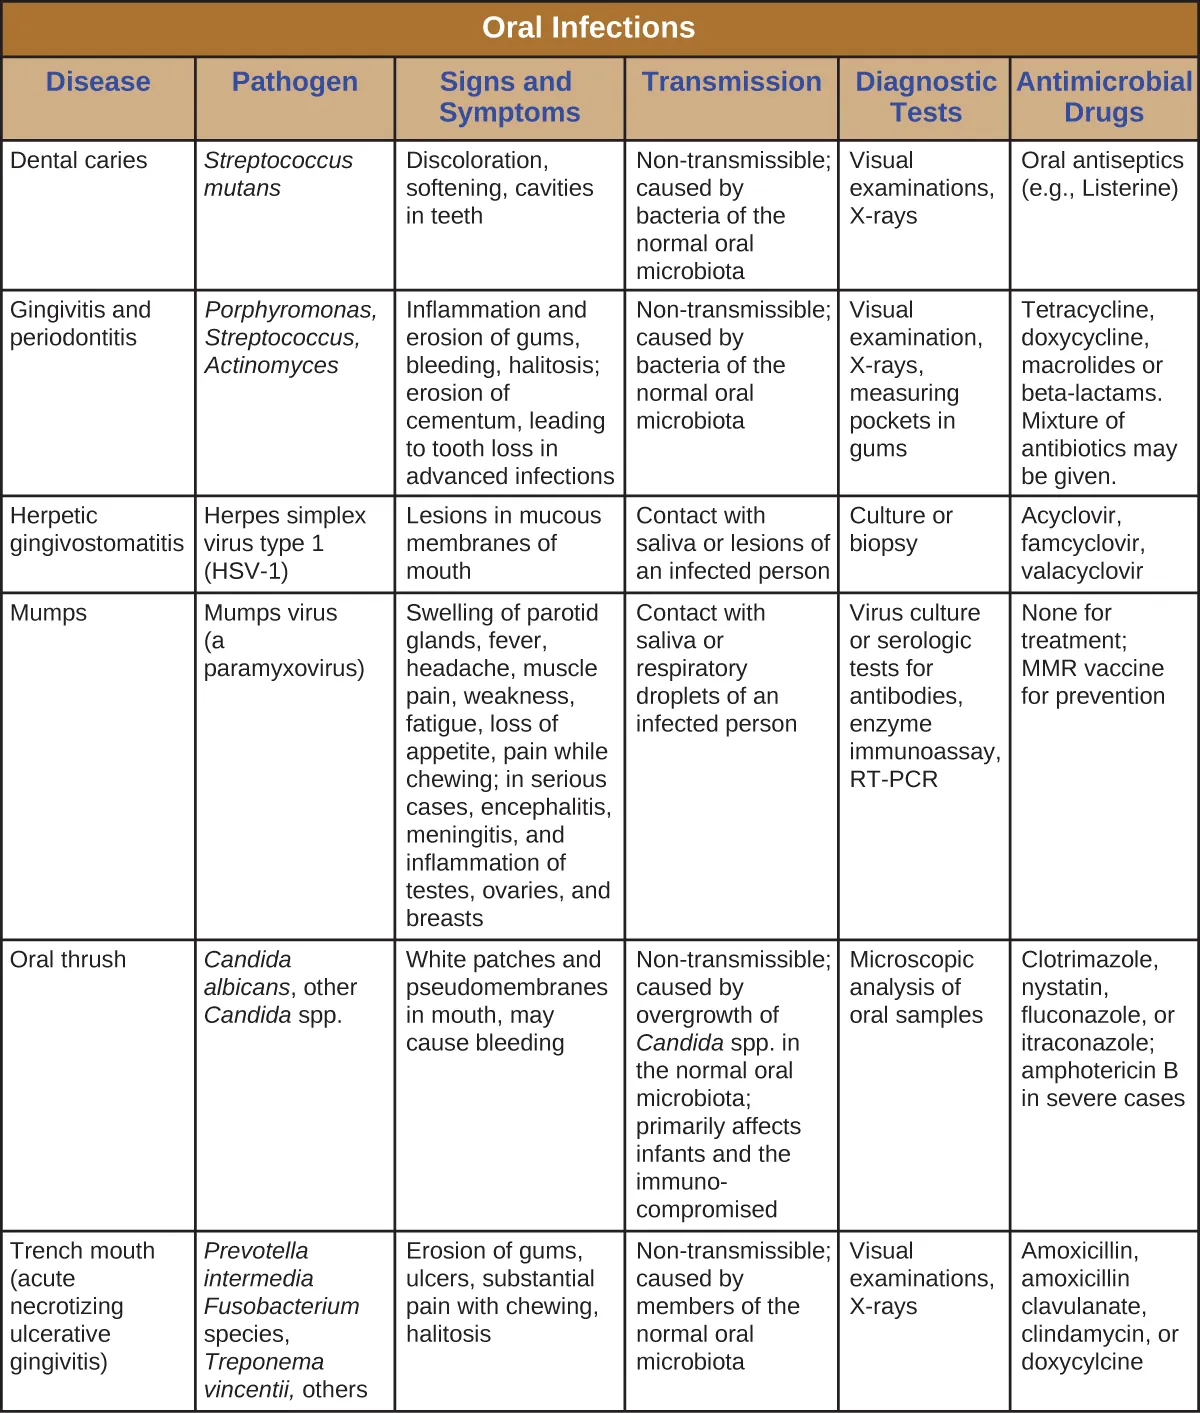 Table titled: Oral Infections. Columns: Disease, Pathogen, Signs and Symptoms, Transmission, Diagnostic Tests, Antimicrobial Drugs. Dental caries; Streptococcus mutans; Discoloration, softening, cavities in teeth; Non-transmissible; caused by bacteria of the normal oral microbiota; Visual examinations, X-rays Oral antiseptics (e.g., Listerine). Gingivitis and periodontitis; Porphyromonas, Streptococcus, Actinomyces; Inflammation and erosion of gums, bleeding, halitosis; erosion of cementum leading to tooth loss in advanced infections; Non-transmissible; caused by bacteria of the normal oral microbiota; Visual examination, X-rays, measuring pockets in gums; Tetracycline, doxycycline, macrolides or beta-lactams. Mixture of antibiotics may be given. Herpetic gingivostomatitis; Herpes simplex virus type 1 (HSV-1); Lesions in mucous membranes of mouth Contact with saliva or lesions of an infected person Culture or biopsy; Acyclovir, famcyclovir, valacyclovir. Mumps; Mumps virus (a paramyxovirus); Swelling of parotid glands, fever, headache, muscle pain, weakness, fatigue, loss of appetite, pain while chewing; in serious cases, encephalitis, meningitis, and inflammation of testes, ovaries, and breasts; Contact with saliva or respiratory droplets of an infected person; Virus culture or serologic tests for antibodies, enzyme immunoassay, RT-PCR; None for treatment; MMR vaccine for prevention. Oral thrush; Candida albicans, other Candida spp.;  White patches and pseudomembranes in mouth, may cause bleeding; Nontransmissible; caused by overgrowth of Candida spp. in the normal oral microbiota; primarily affects infants and the immunocompromised. Microscopic analysis of oral samples; Clotrimazole, nystatin, fluconazole, or itraconazole; amphotericin B in severe cases. Trench mouth (acute necrotizing ulcerative gingivitis); Prevotella intermedia Fusobacterium species, Treponema vincentii, others; Erosion of gums, ulcers, substantial pain with chewing, halitosis; Nontransmissible; caused by members of the normal oral microbiota; Visual examinations, X-rays; Amoxicillin, amoxicillin clavulanate, clindamycin, or doxycycline.